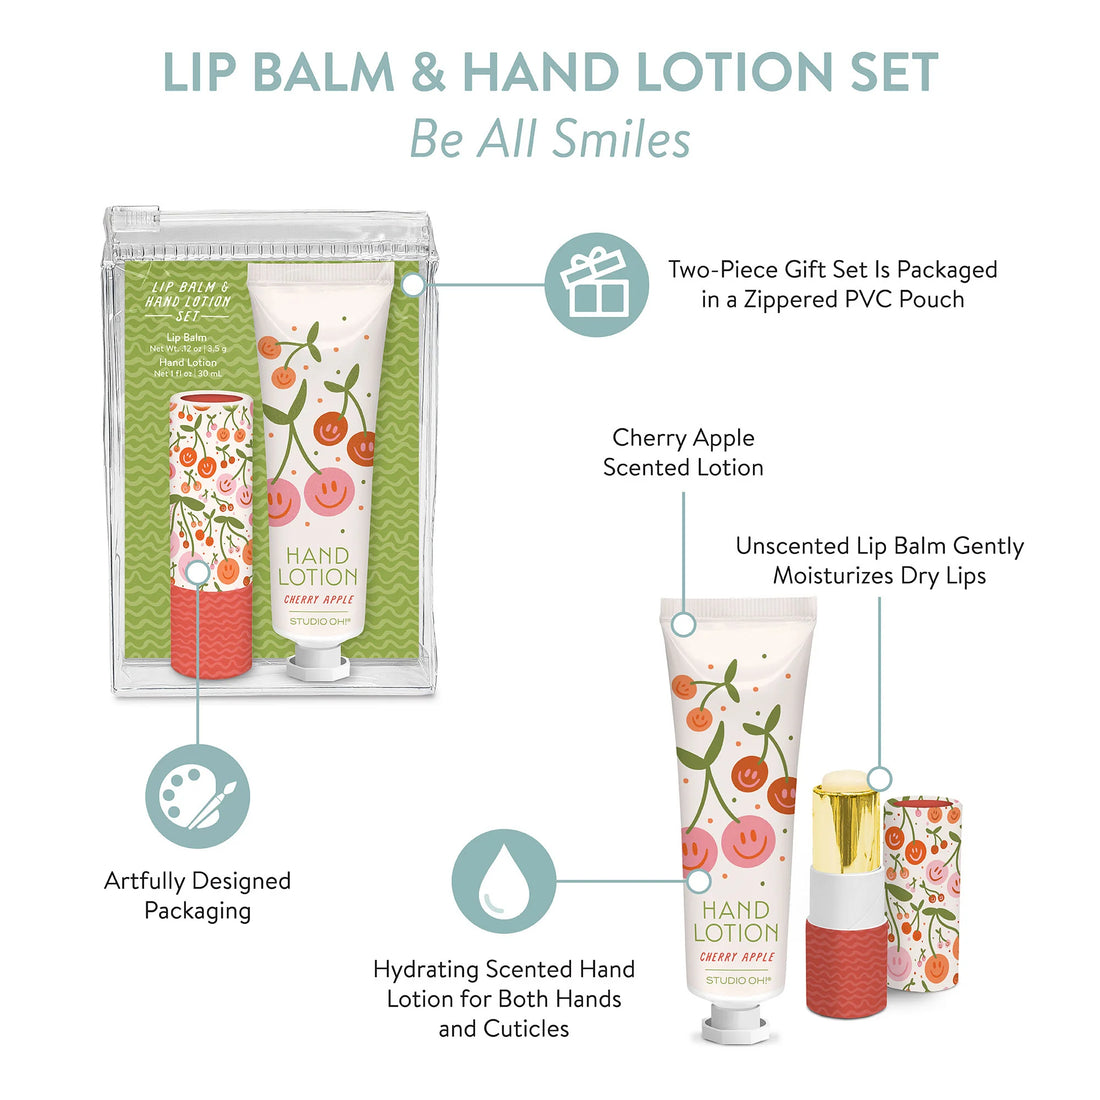 Be All Smiles Lip Balm & Hand Lotion Set Preview #3